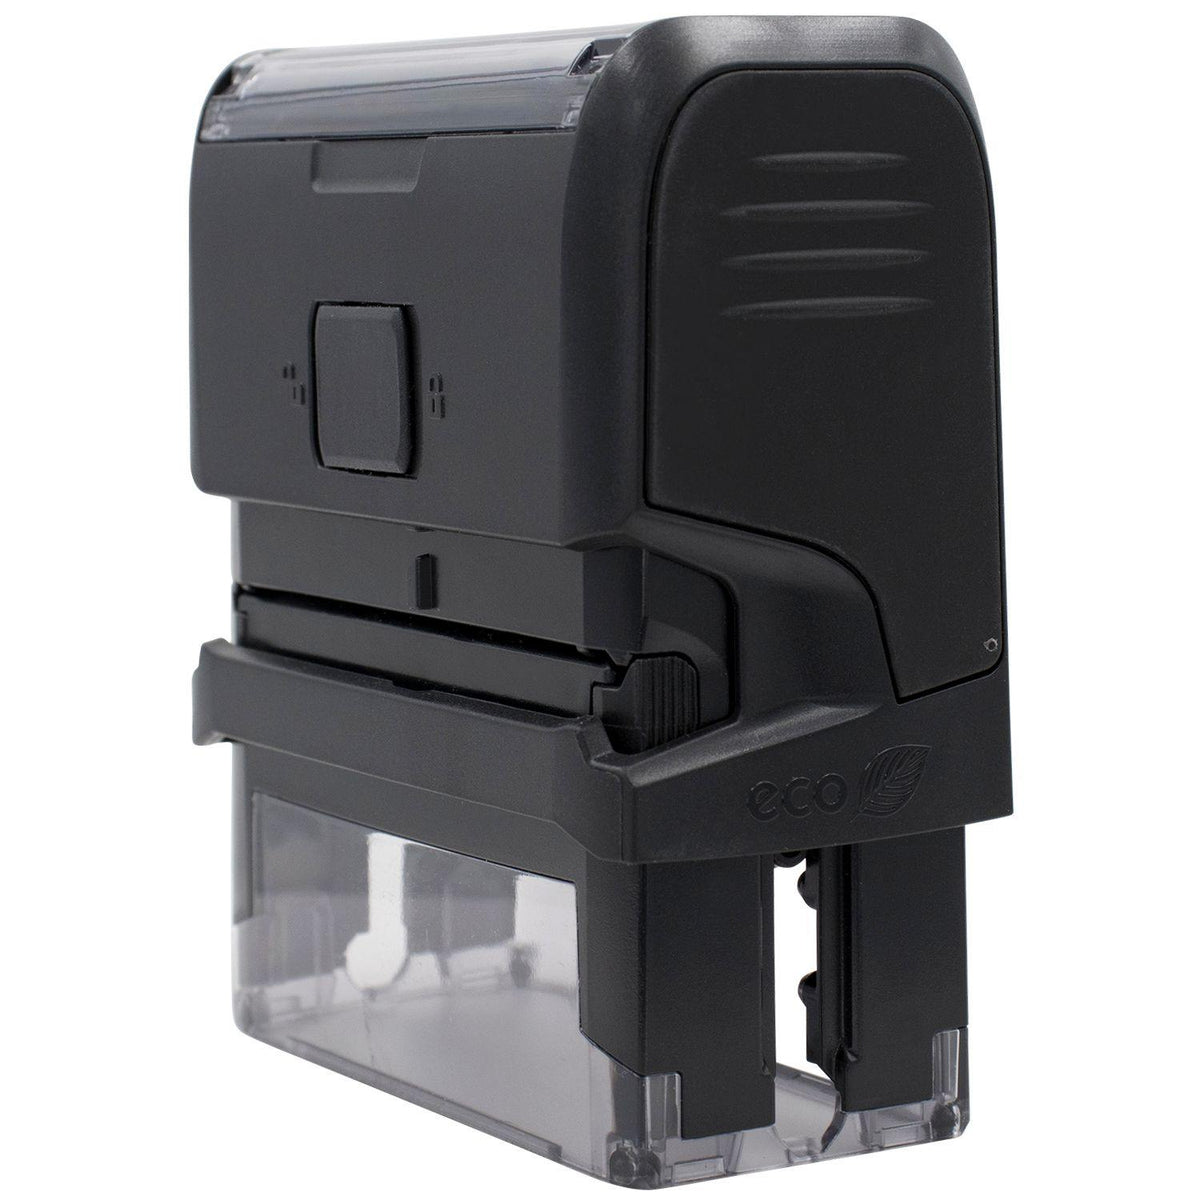 Large Self-Inking Narrow Bold Past Due Stamp - Engineer Seal Stamps - Brand_Trodat, Impression Size_Large, Stamp Type_Self-Inking Stamp, Type of Use_Finance, Type of Use_Office